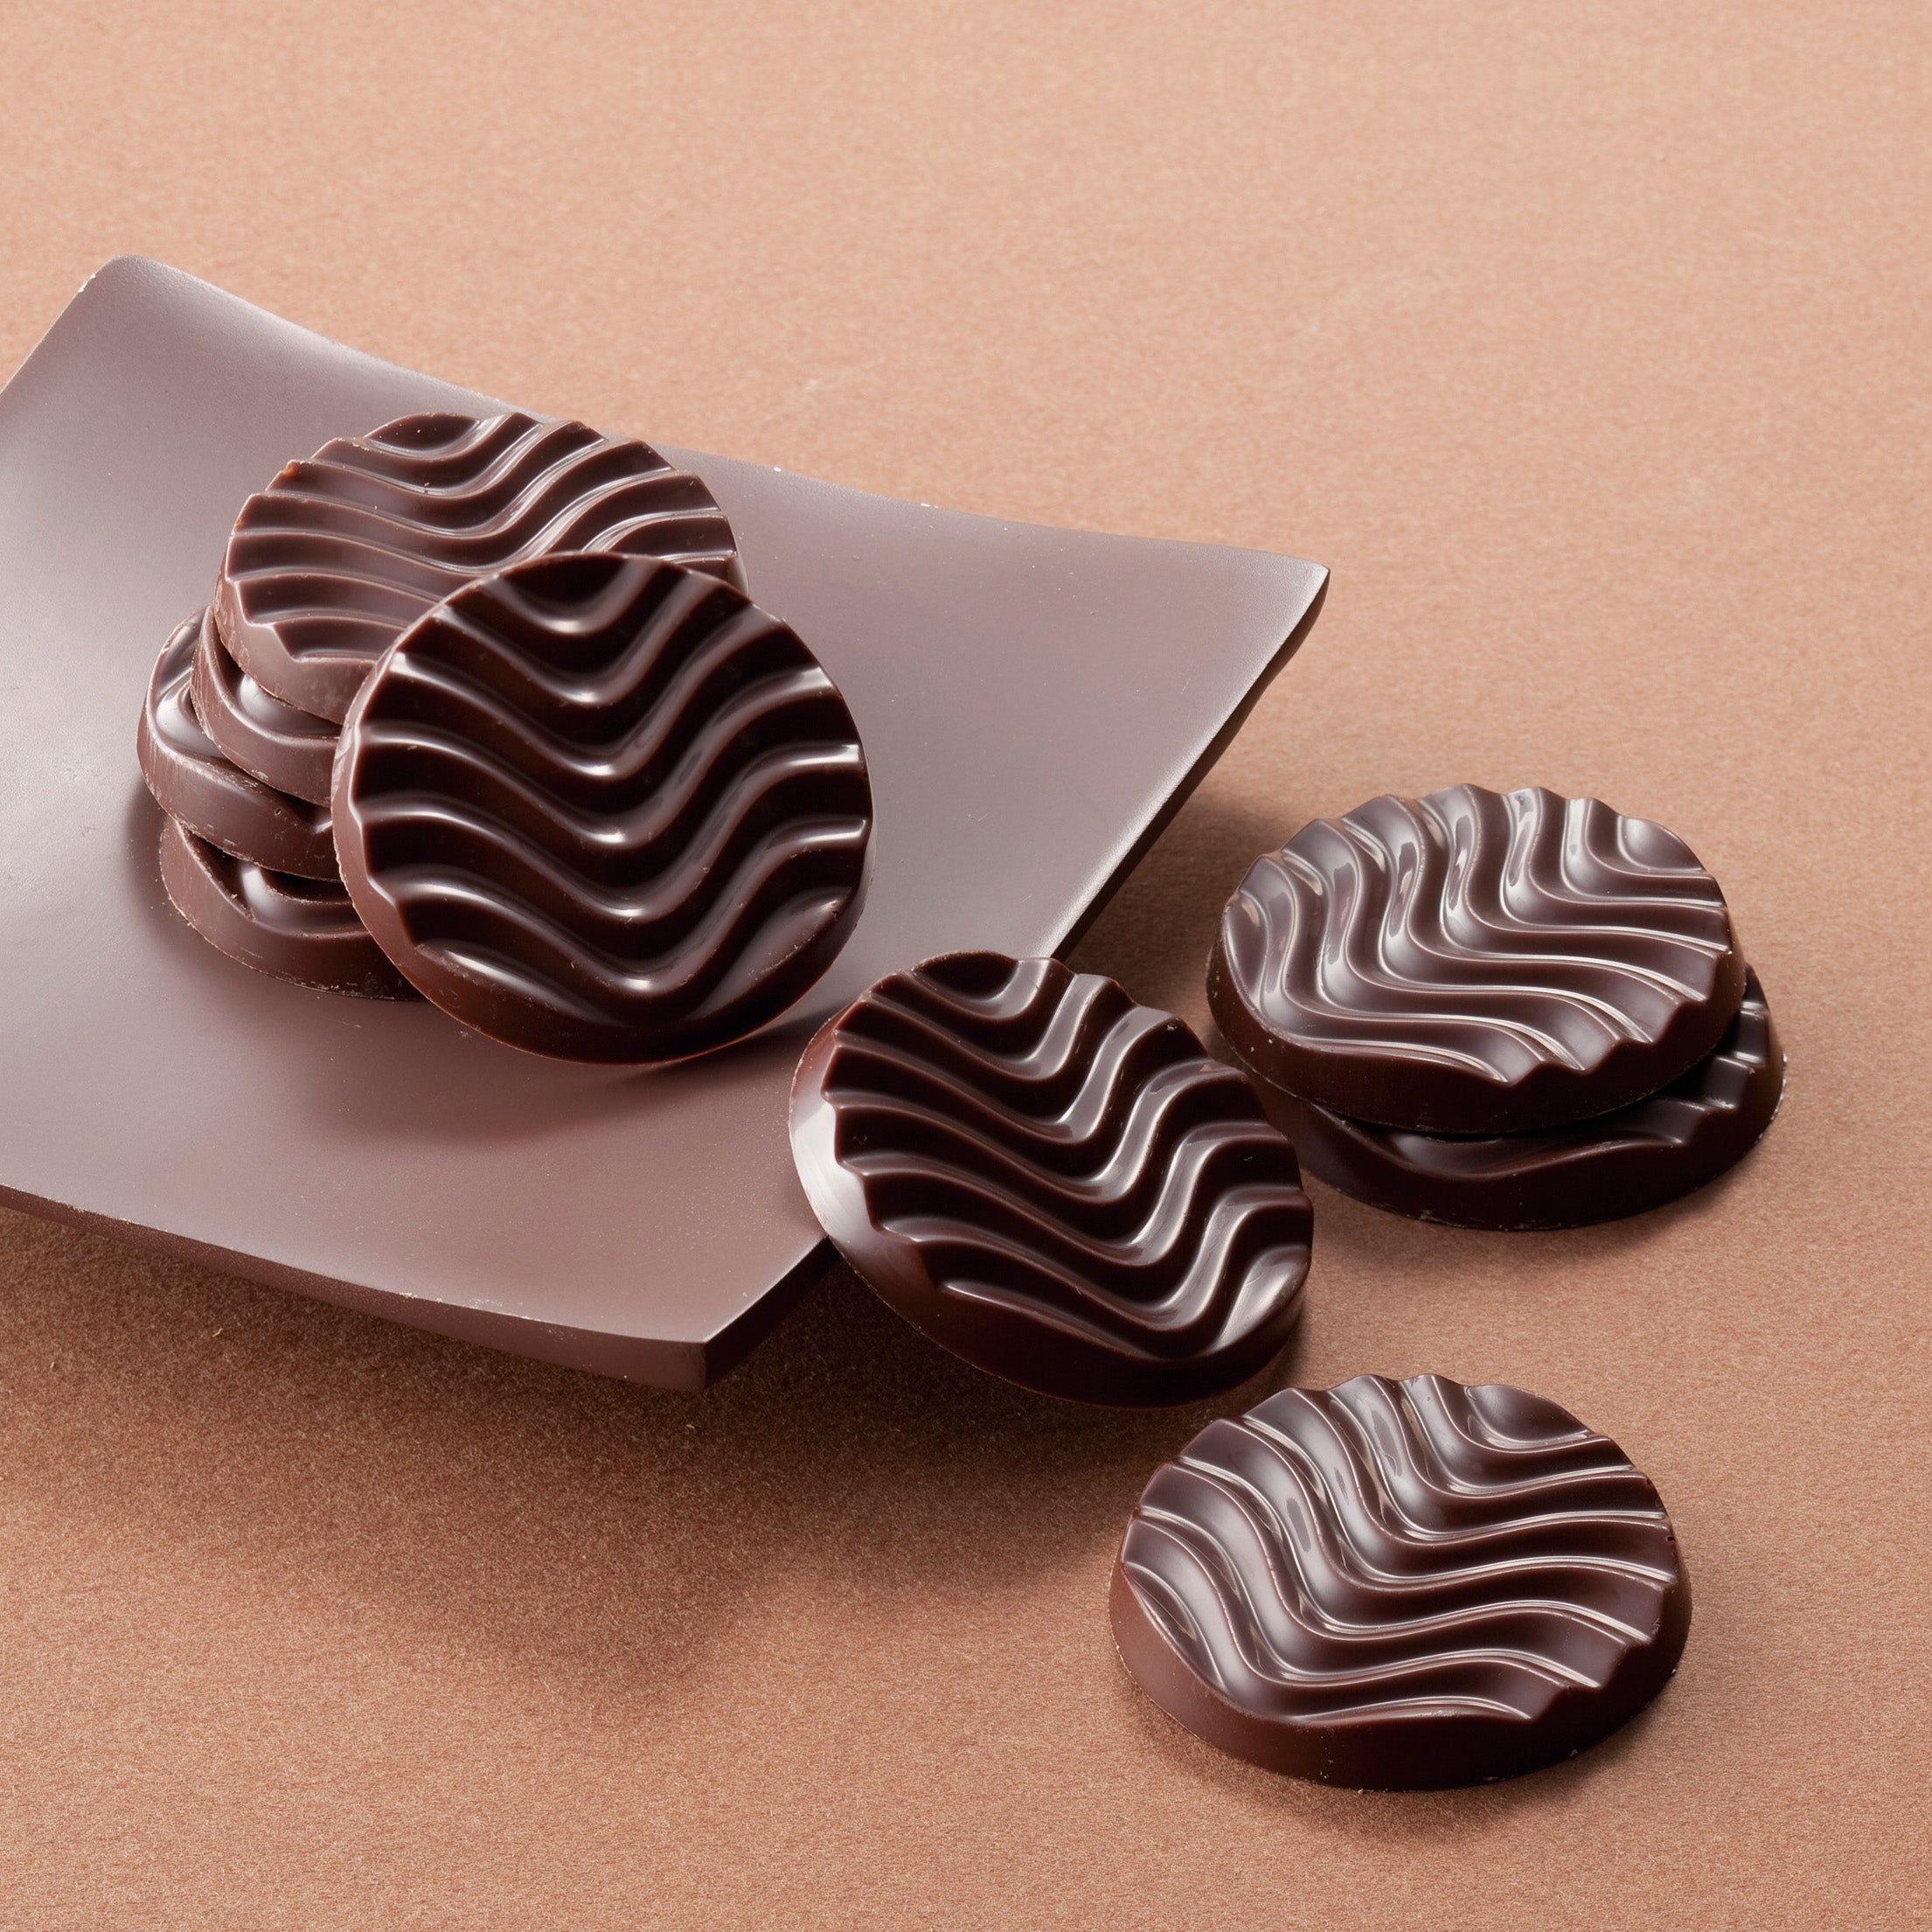 Image shows brown chocolate discs on a brown plate.